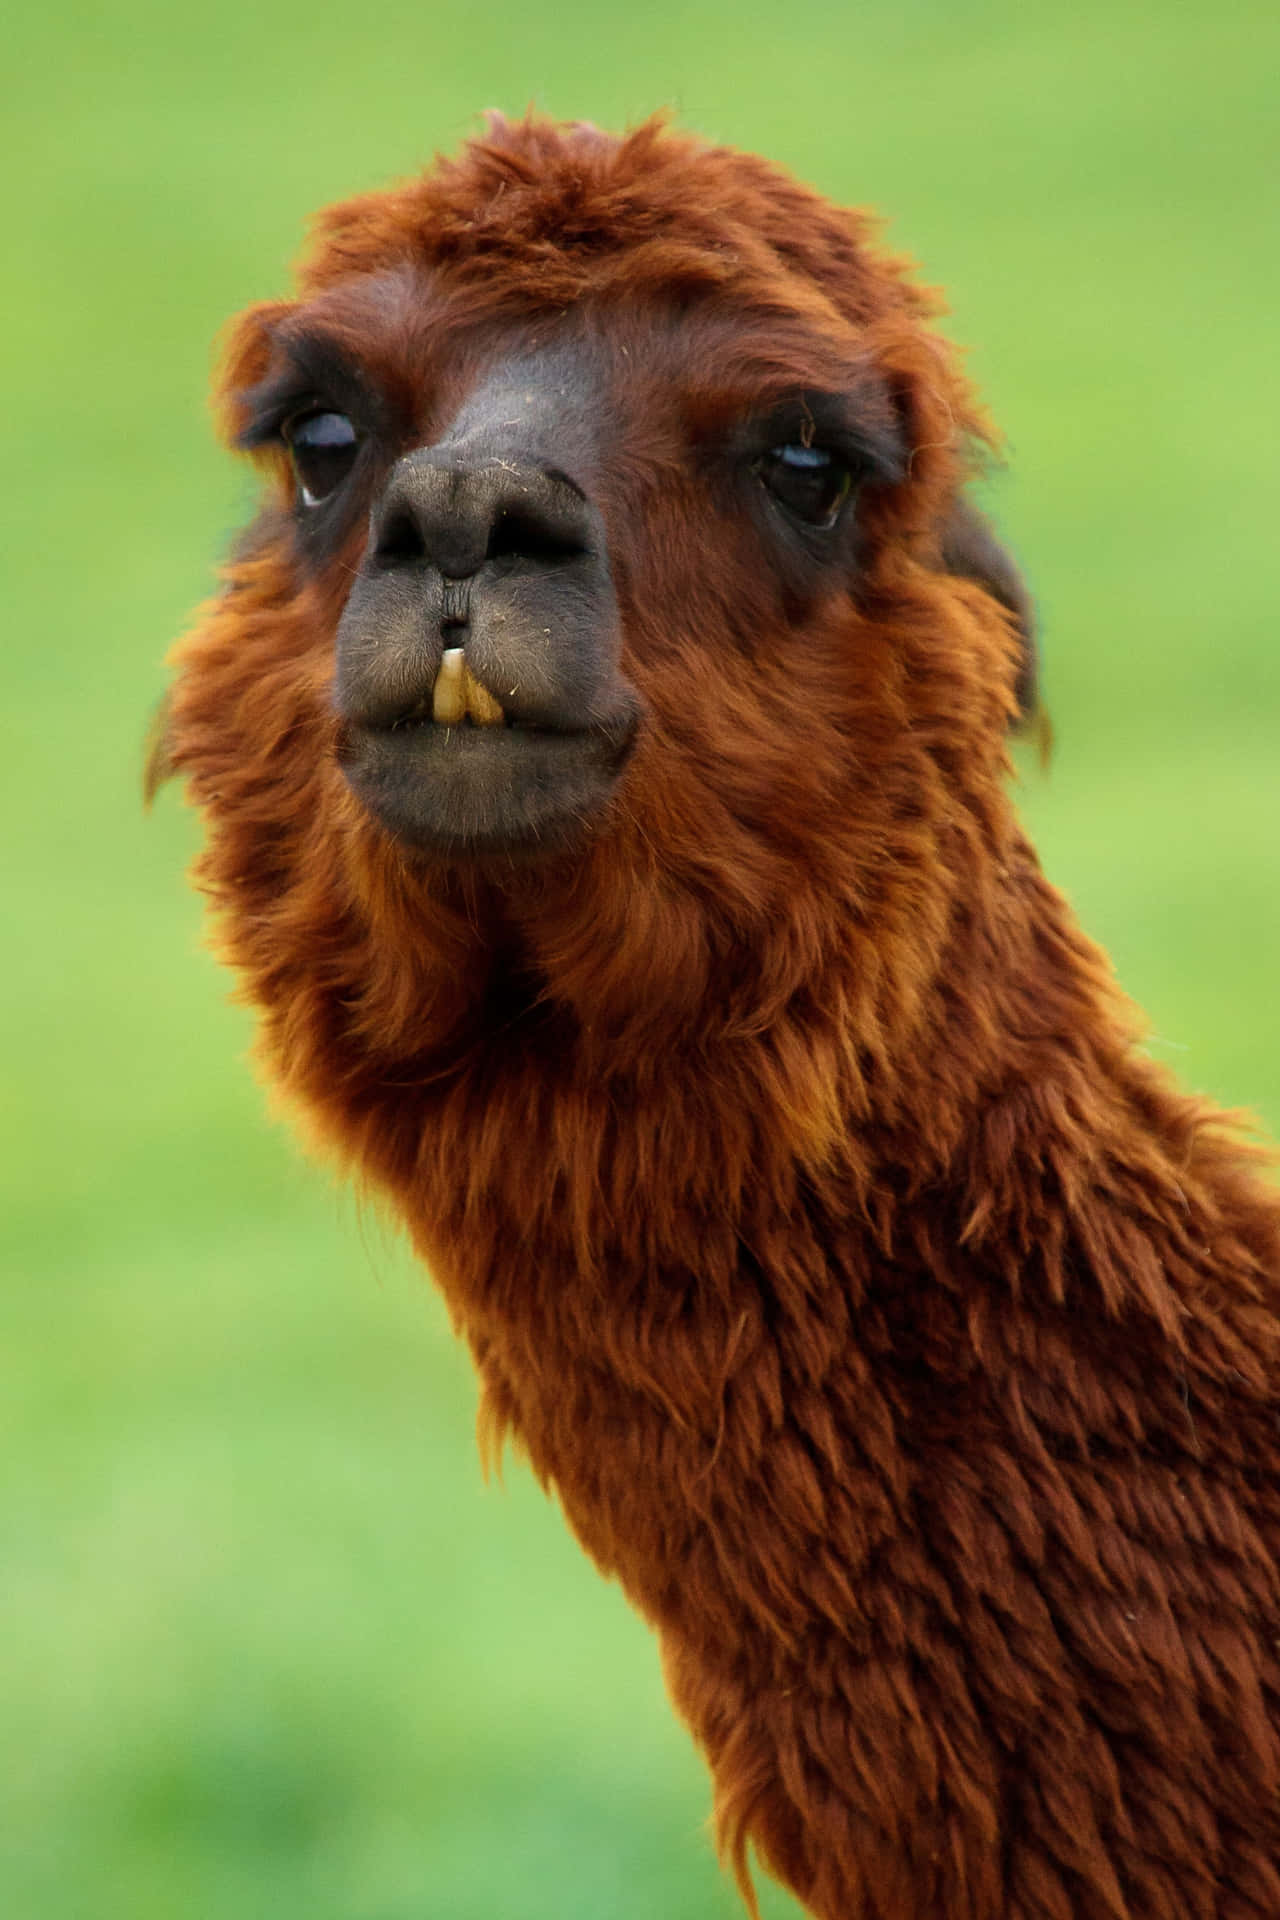 Take your stress away with this beautiful alpaca!